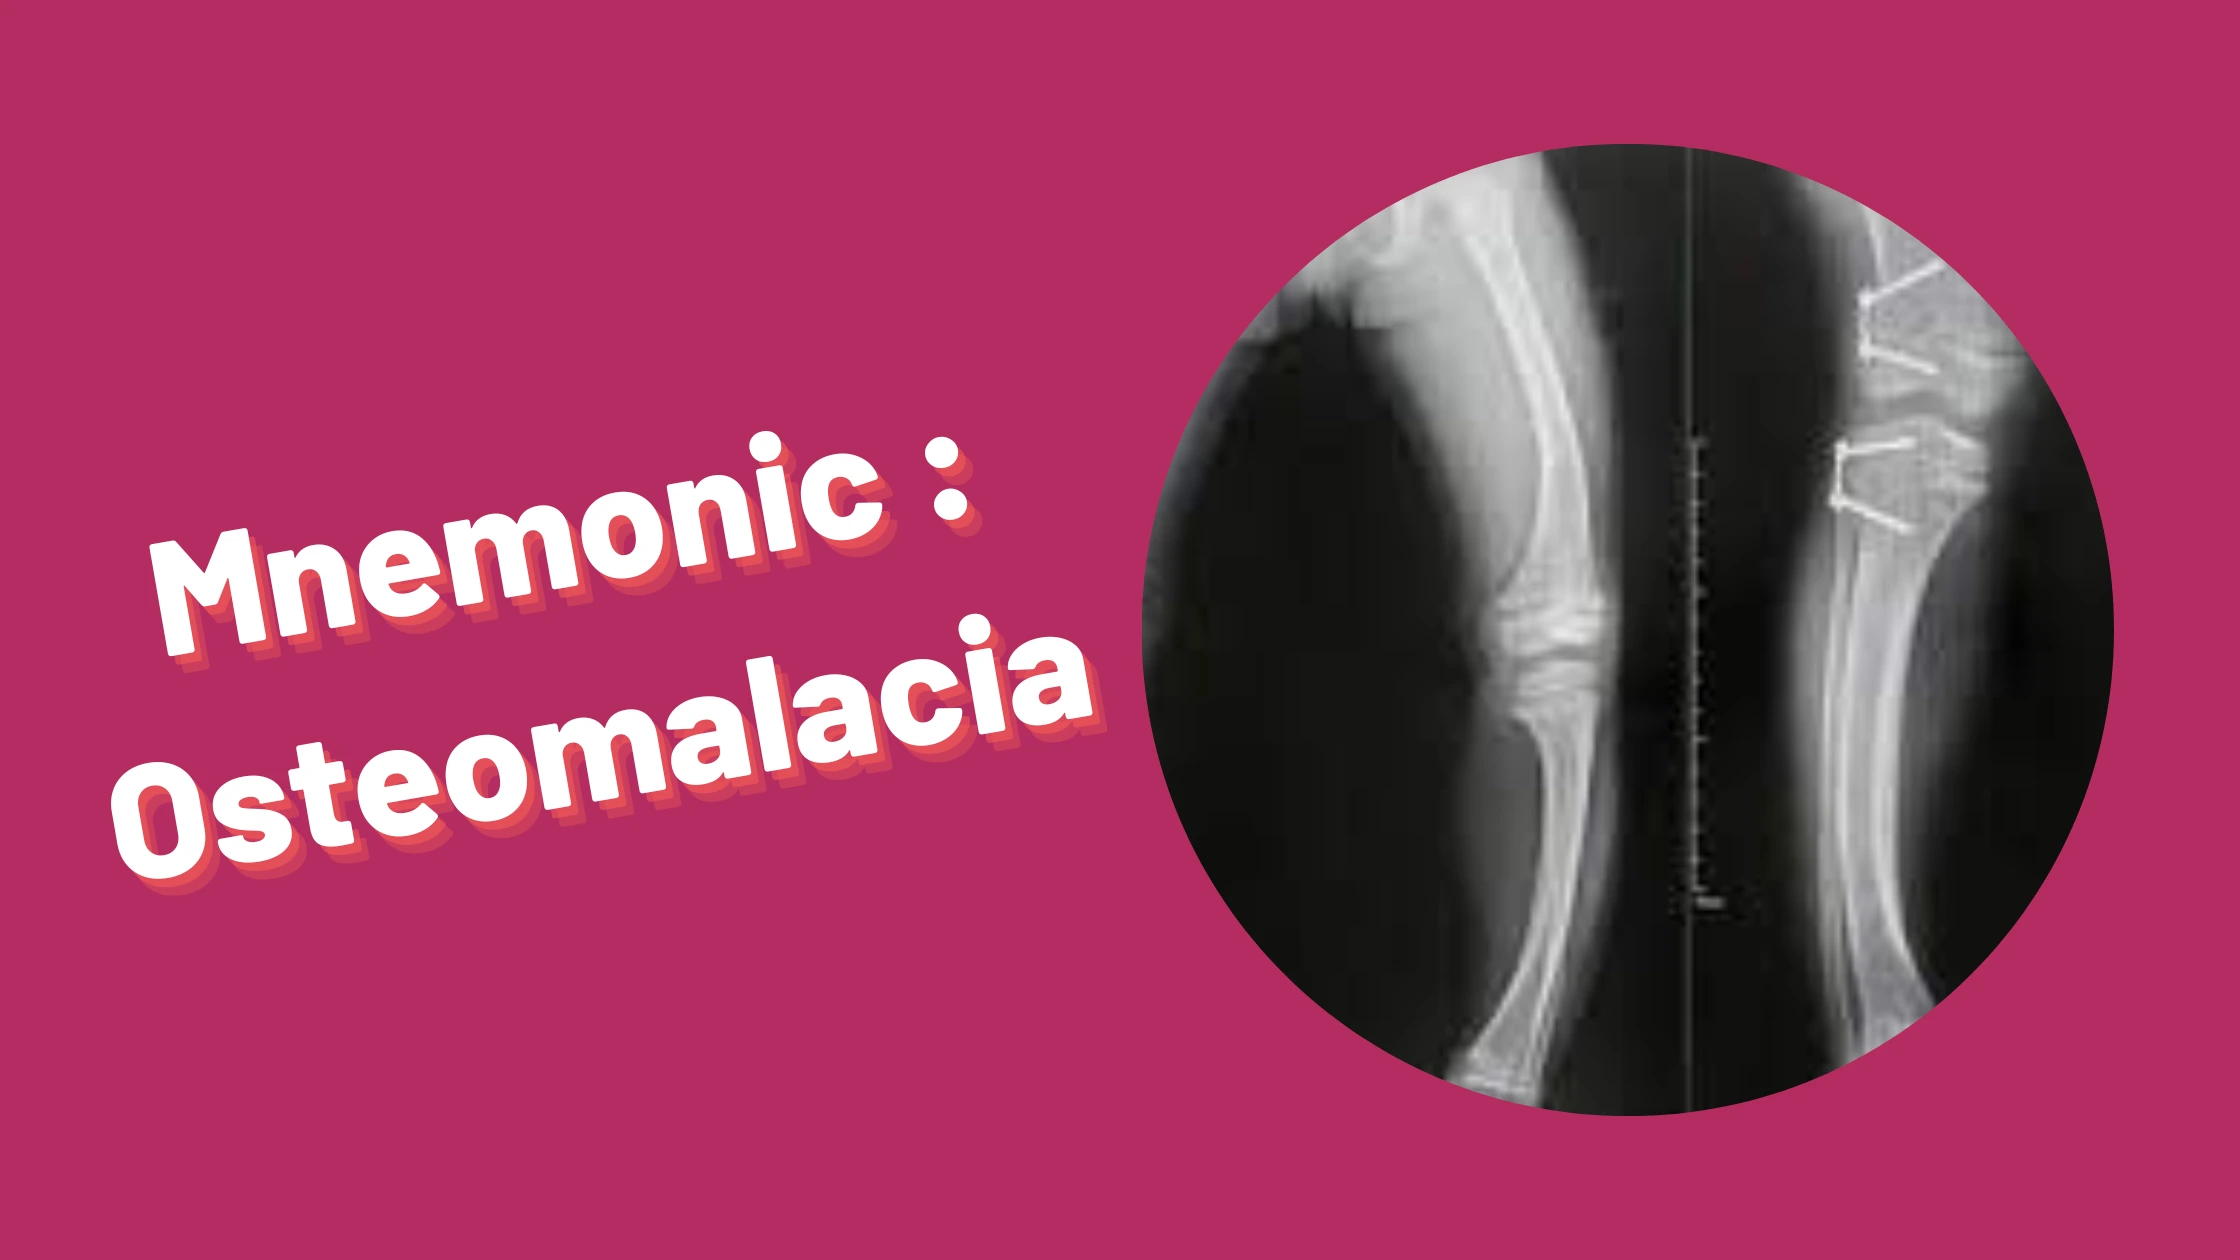 You are currently viewing [Very Cool] Mnemonic : Osteomalacia